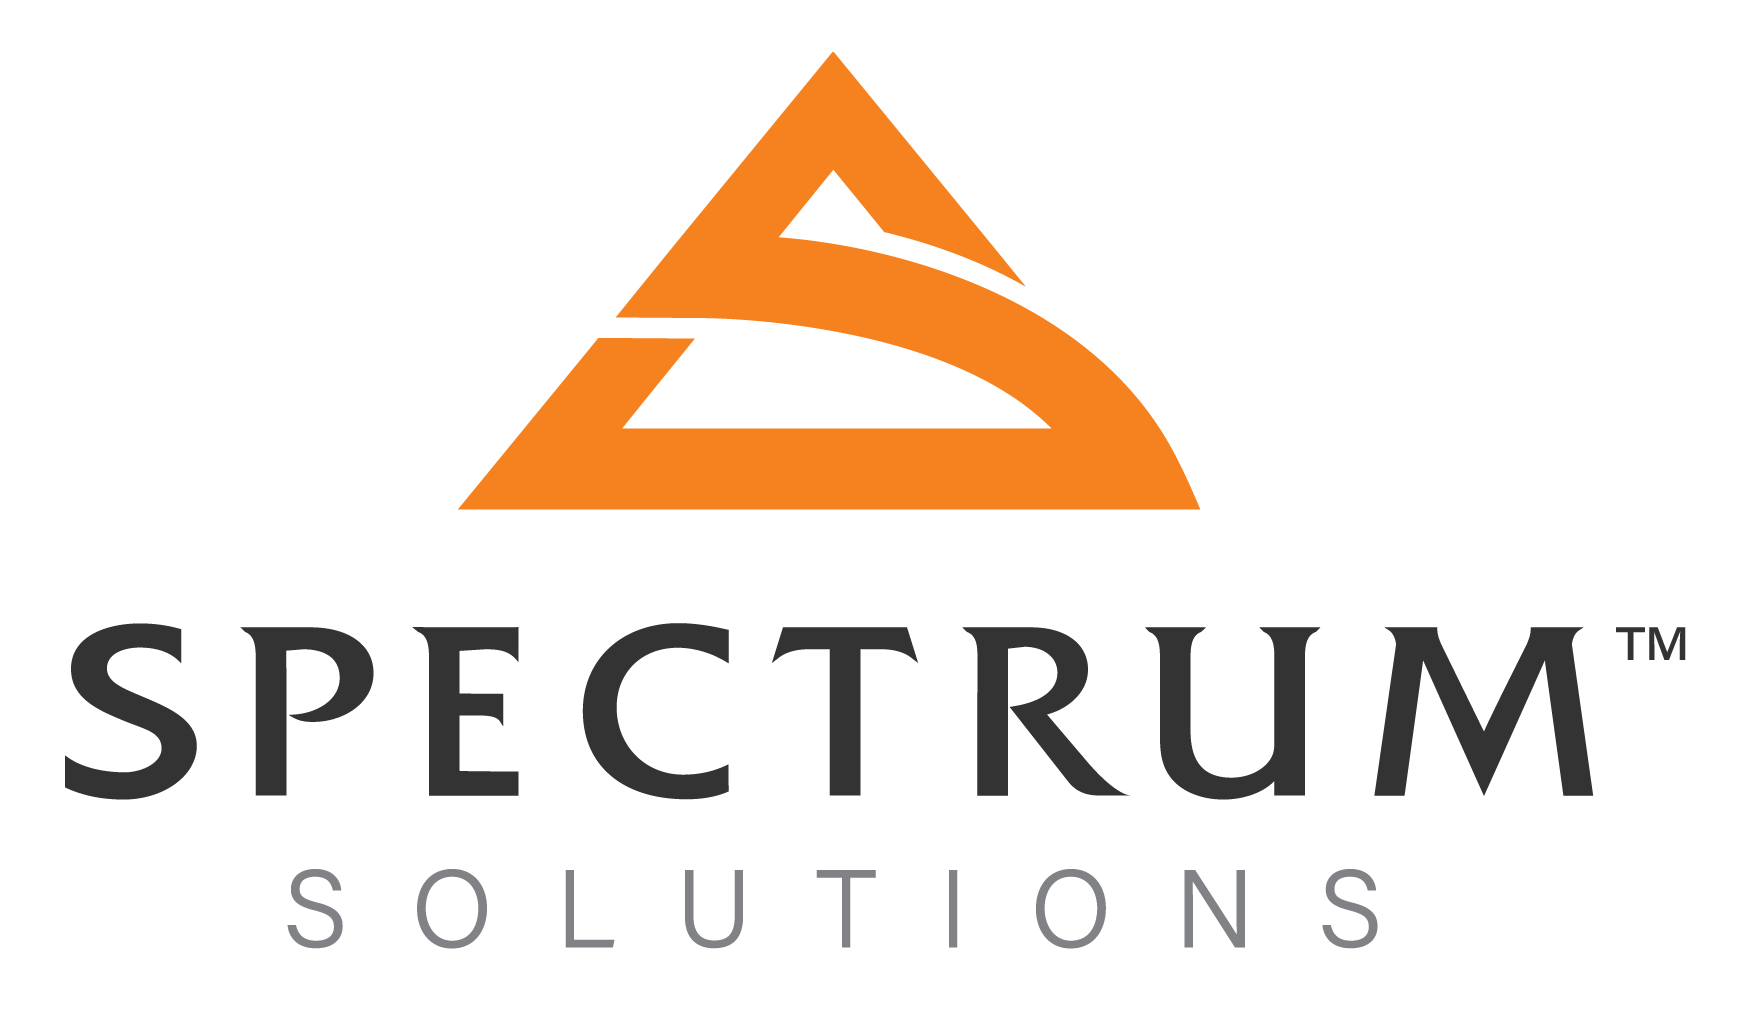 Spectrum Solutions Receives Device FDA Emergency Use Authorization for Unsupervised Saliva Collection for COVID